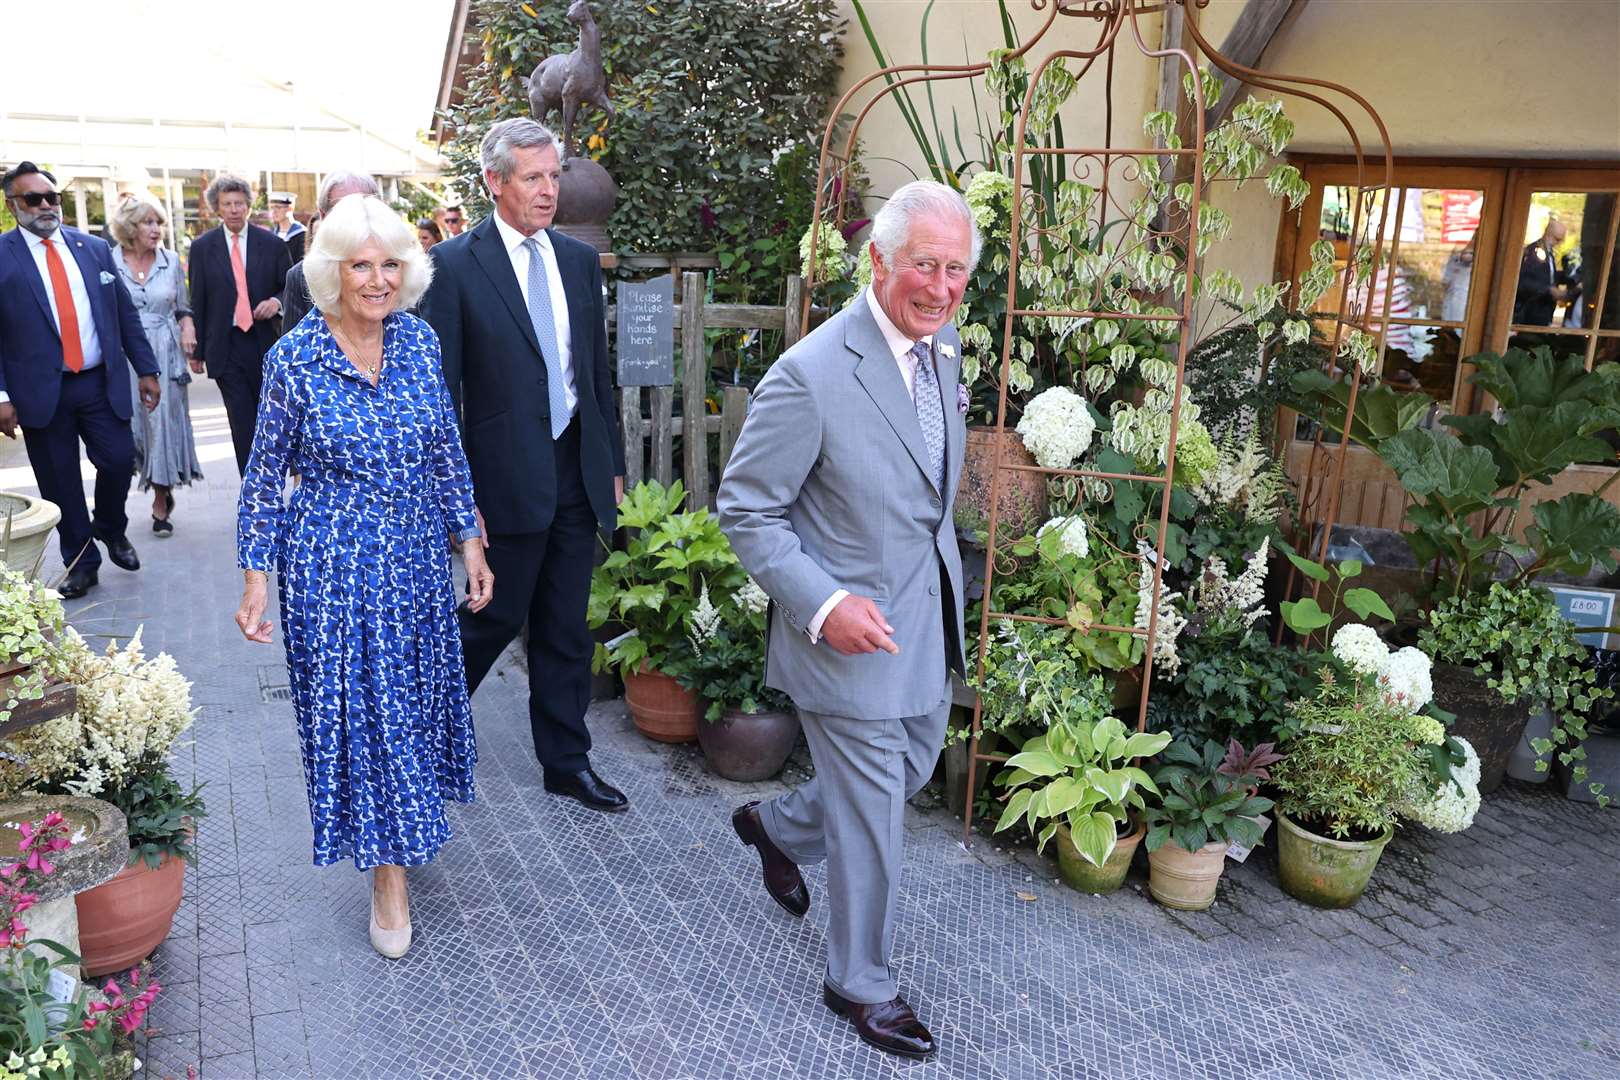 The Prince of Wales and Duchess of Cornwall attend a reception at the Duchy of Cornwall Nursery in Lostwithiel (Chris Jackson/PA)